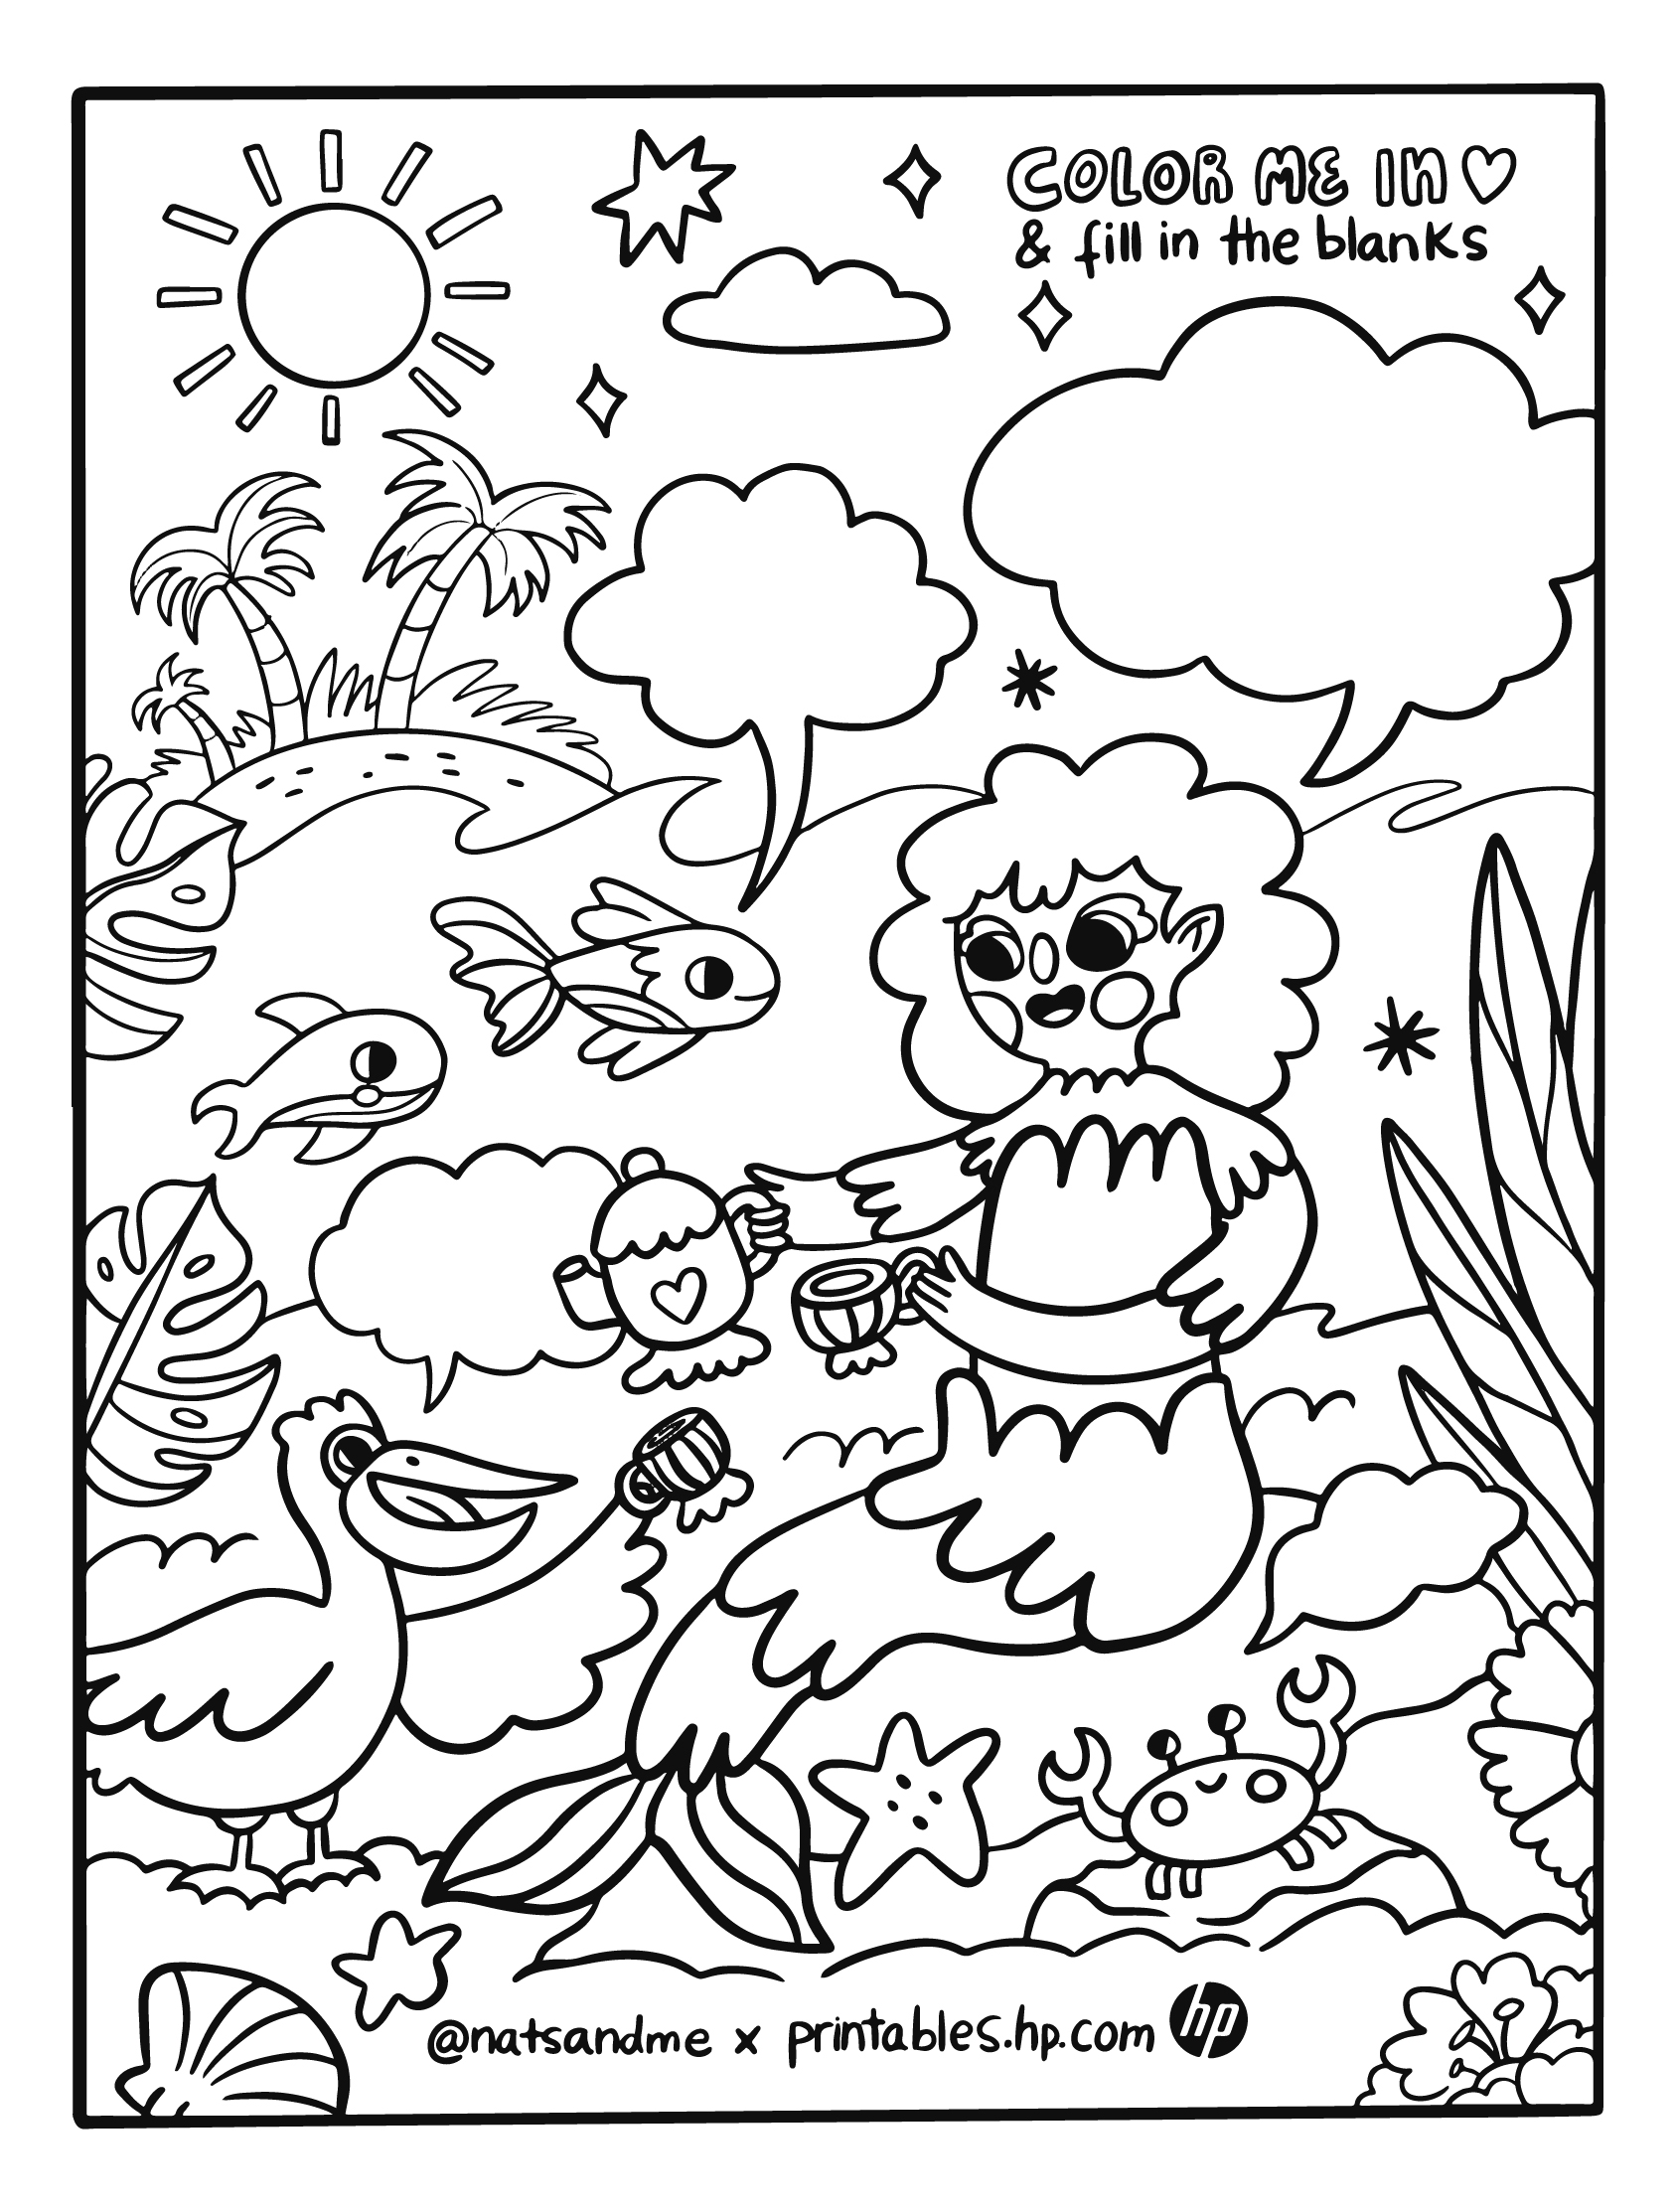 December Coloring Pages: 4 Free Printable Coloring Sheets - Cute Coloring  Pages For Kids